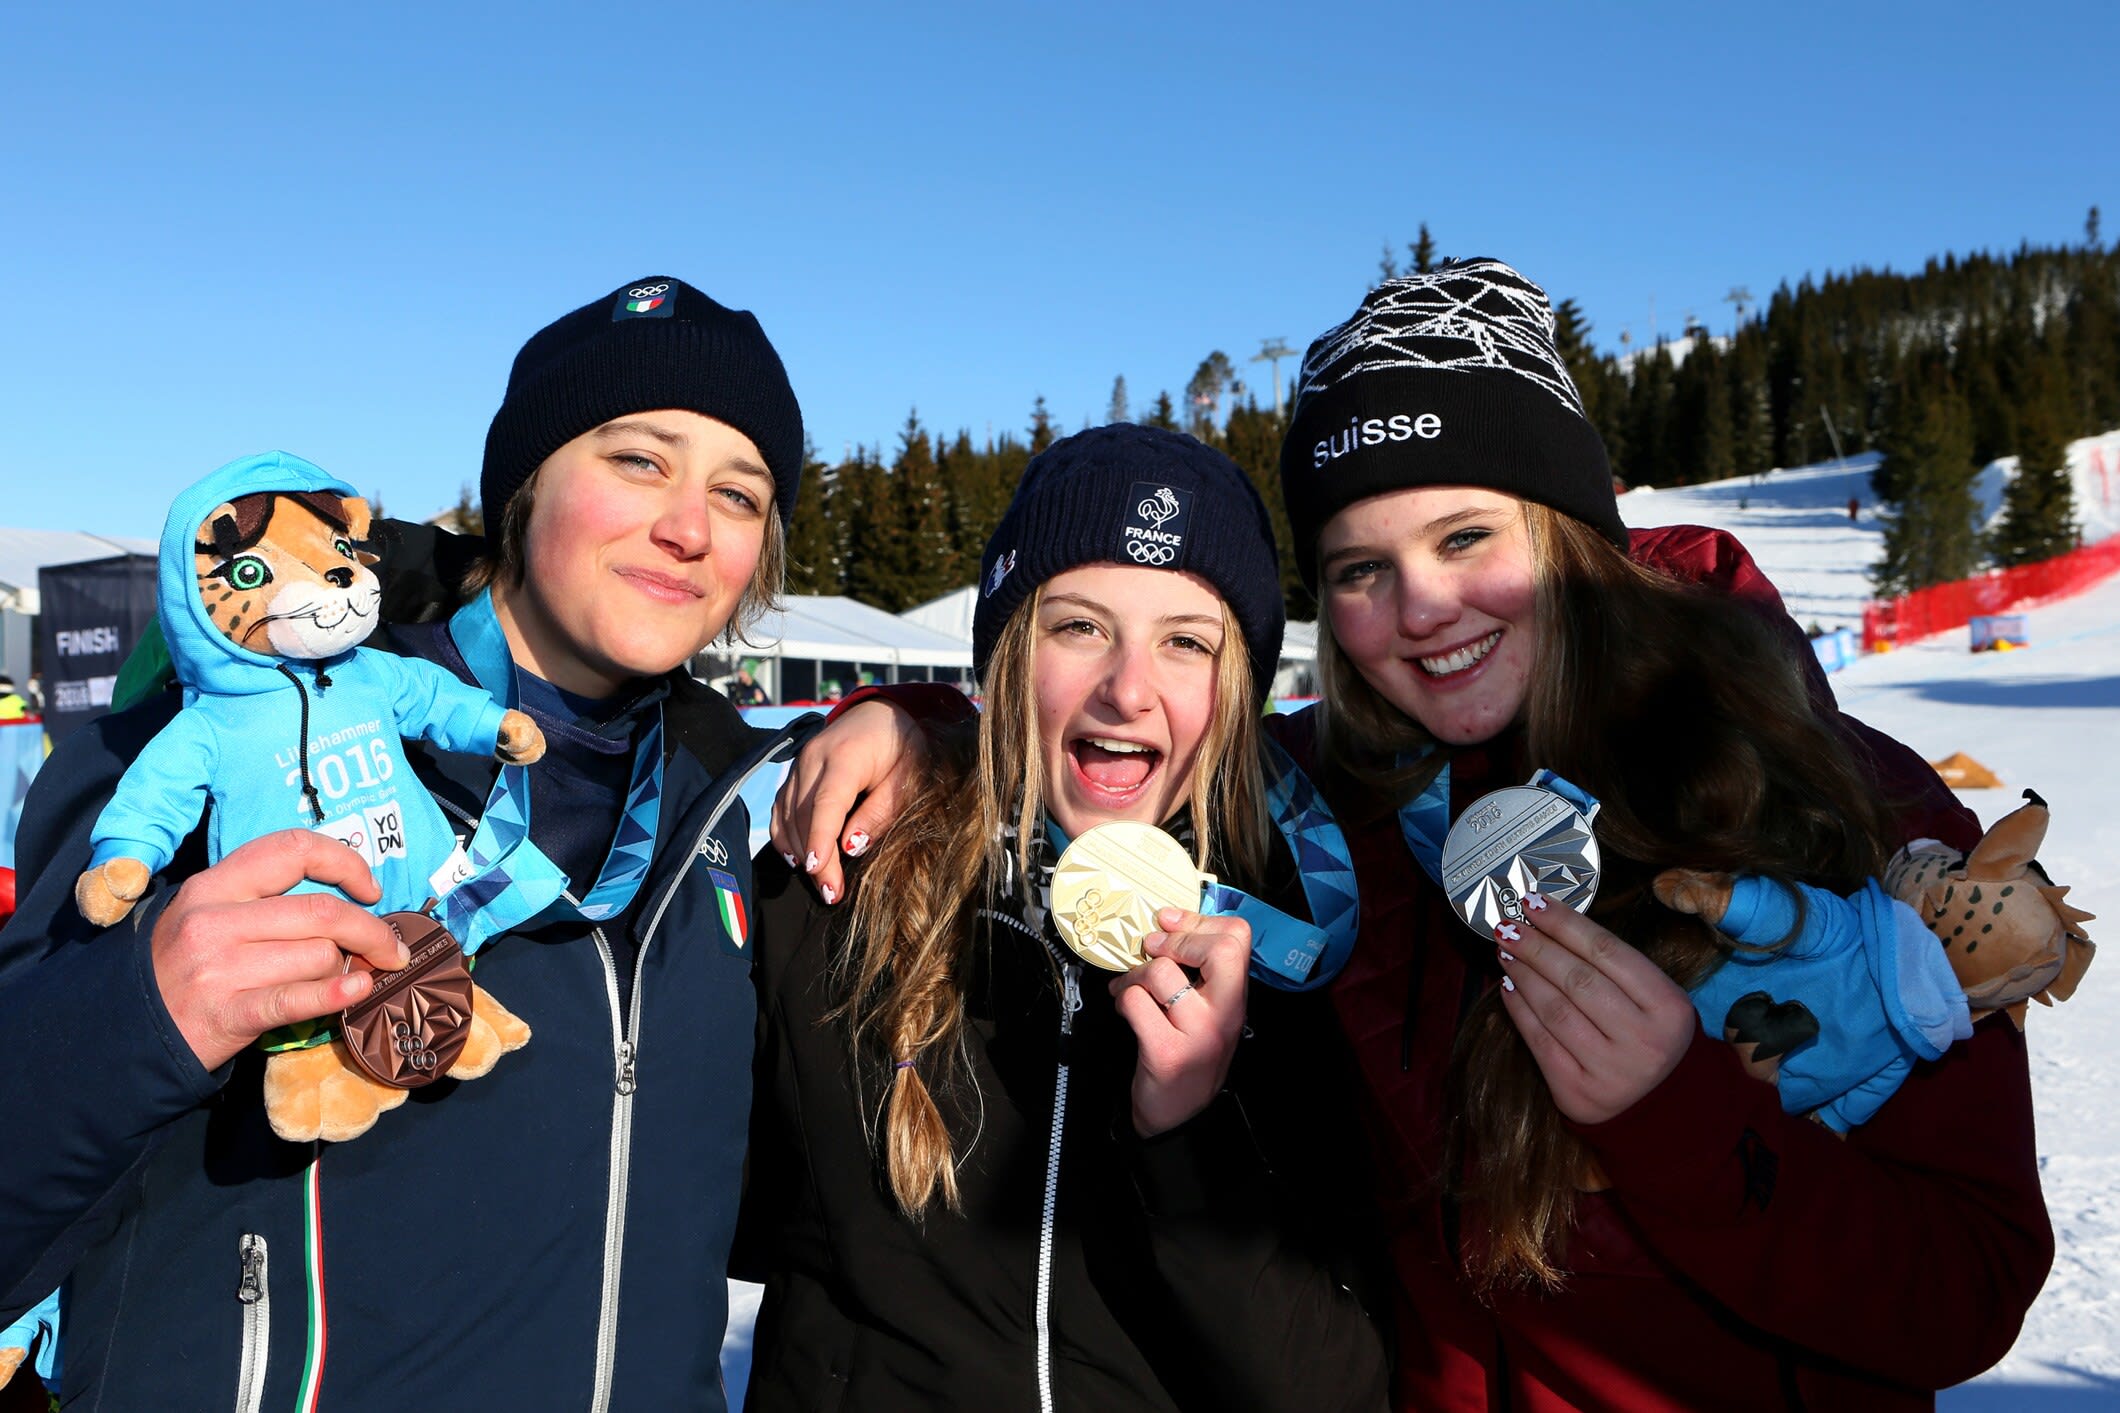 Snowboard cross honours go to Manon Petit and Jake Vedder